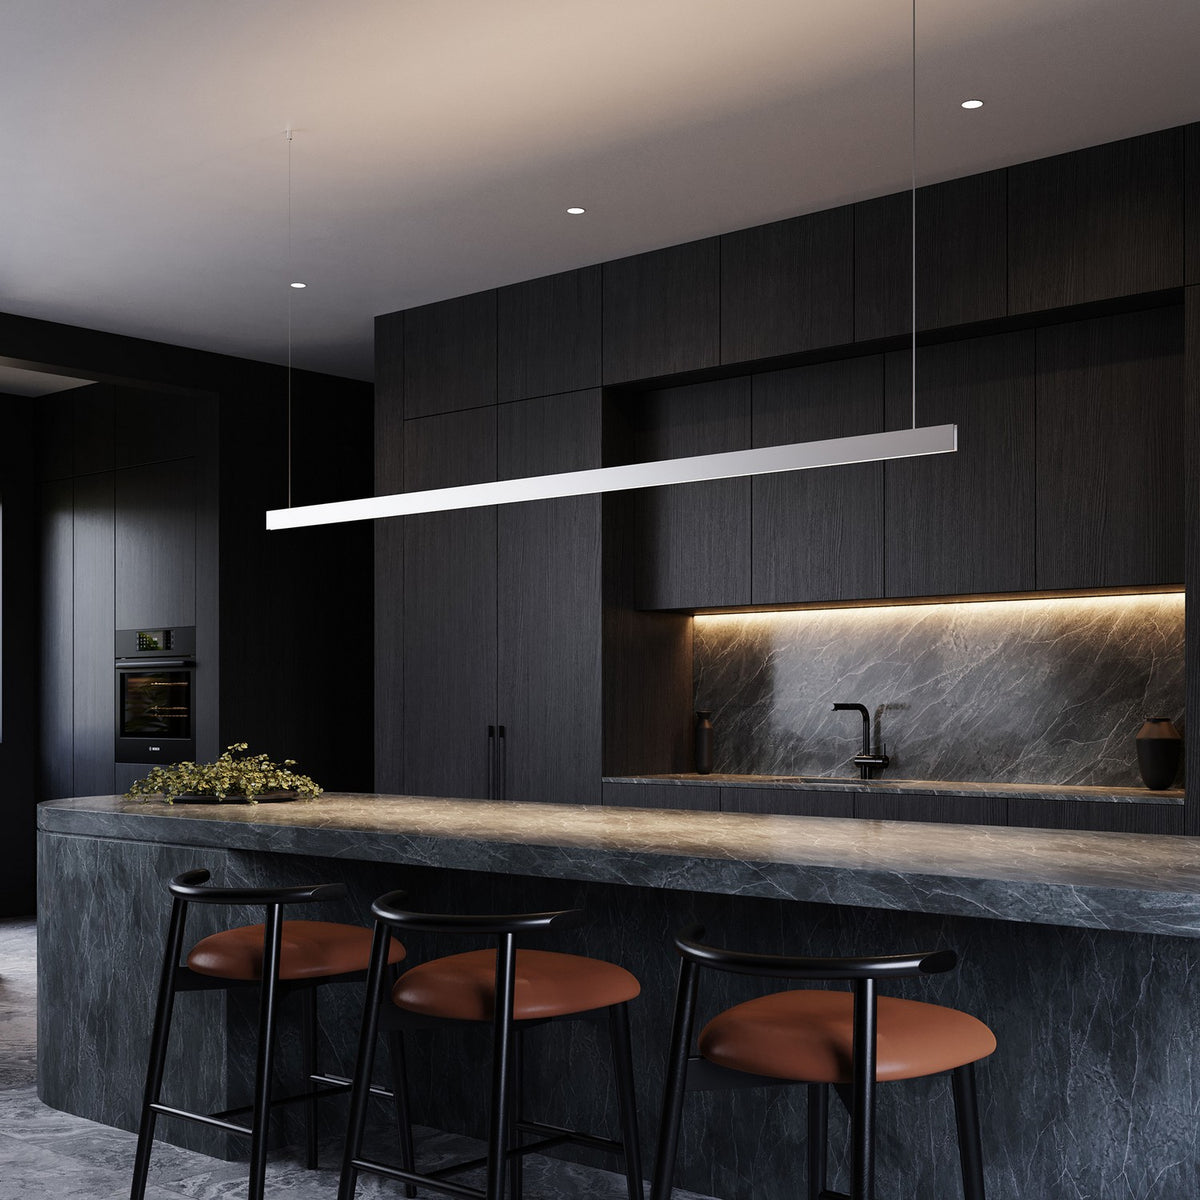 Lithe 2-Sided Linear Pendant